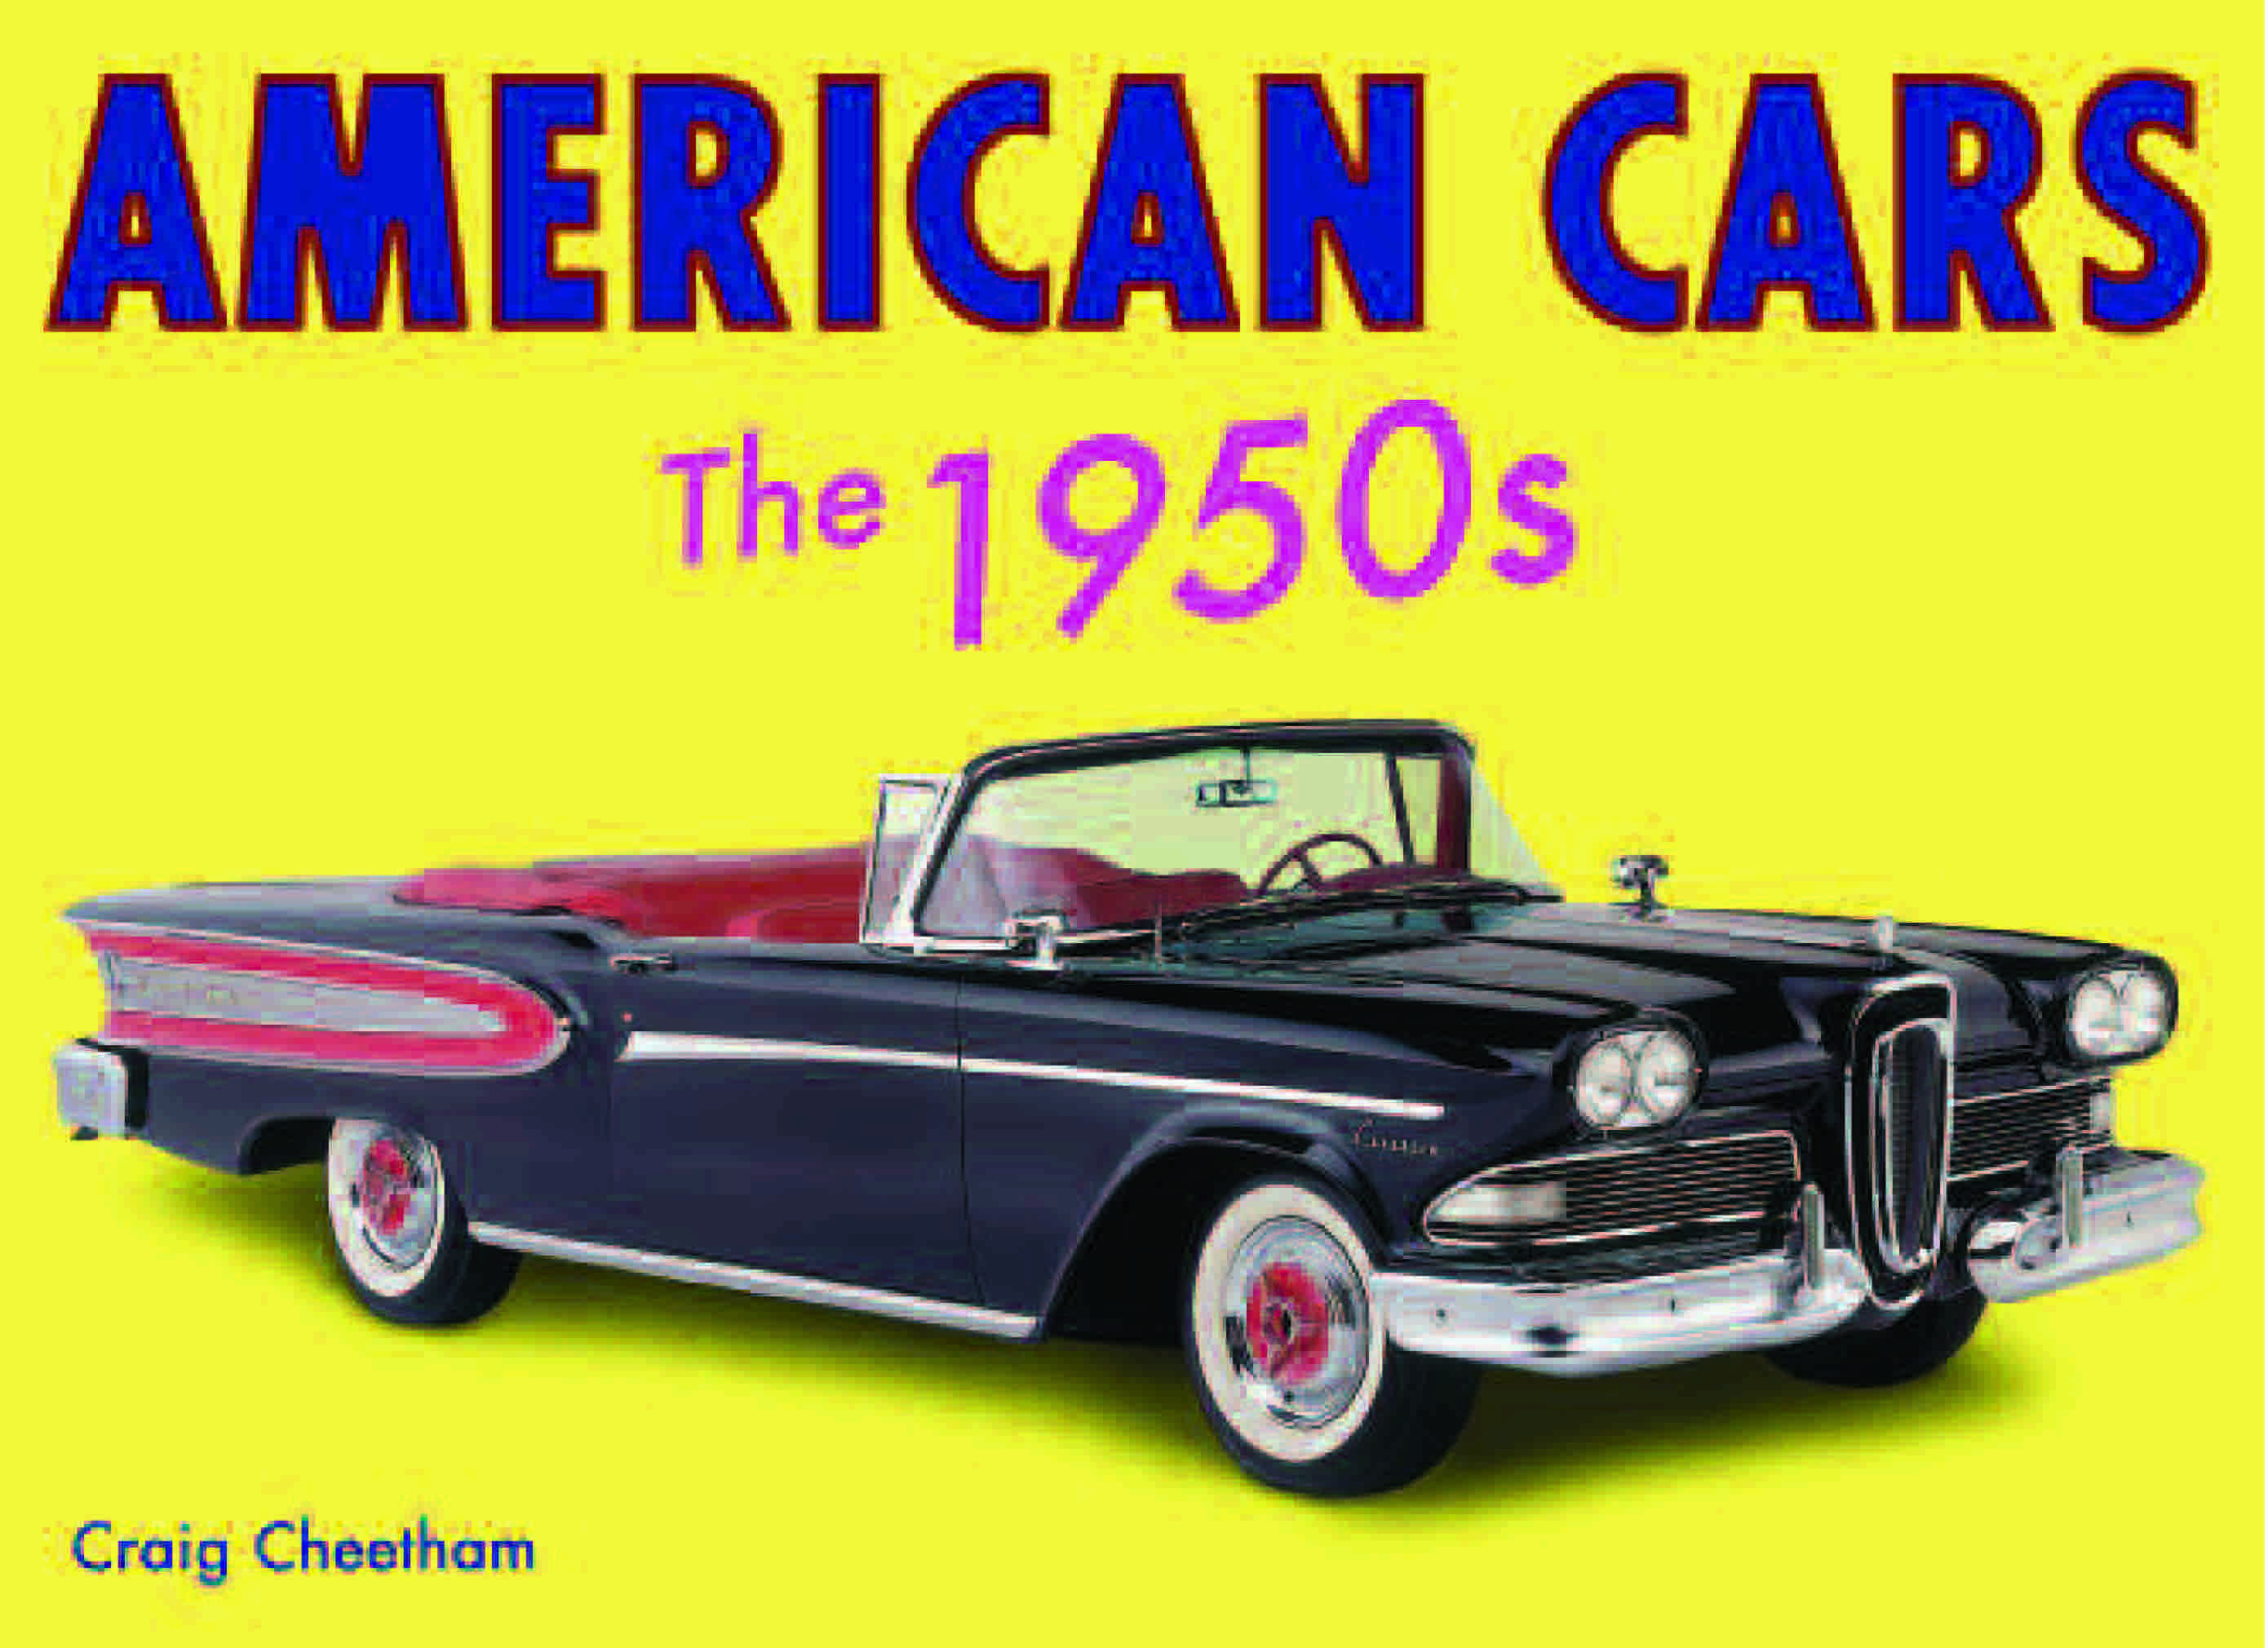 American Cars: The 1950s